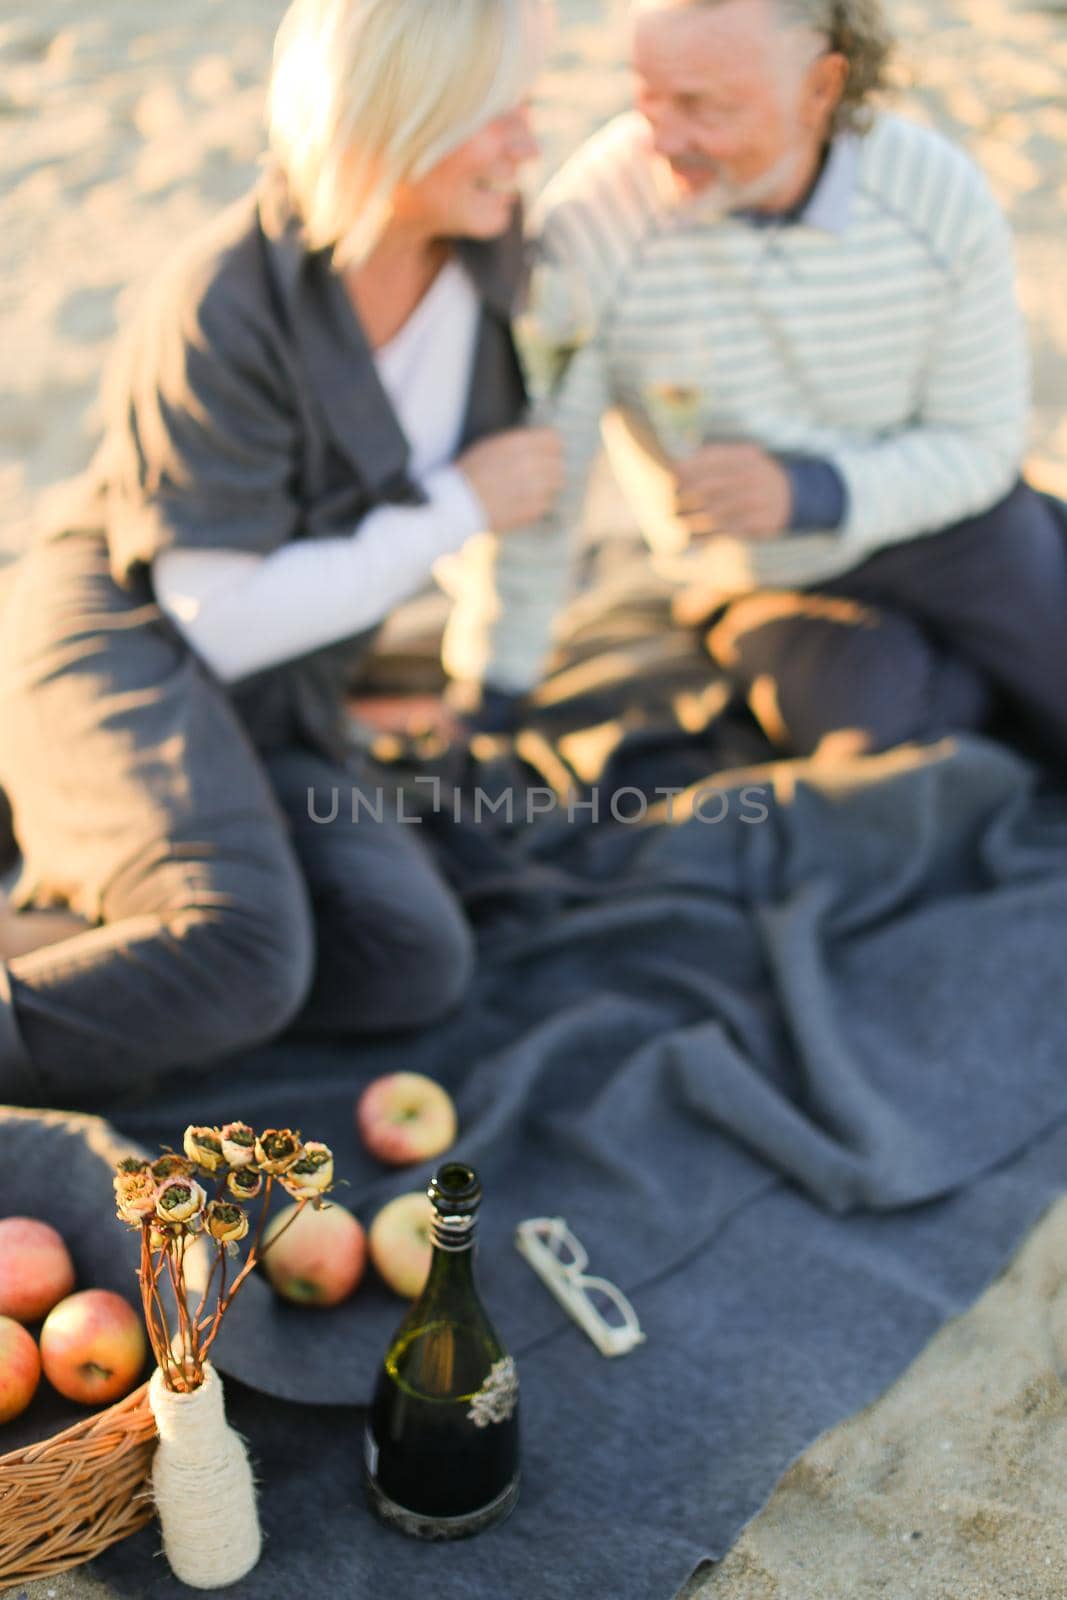 Focus on champagne bottle, pensioners with glasses sitting on plaid on sand beach in blurry background. by sisterspro